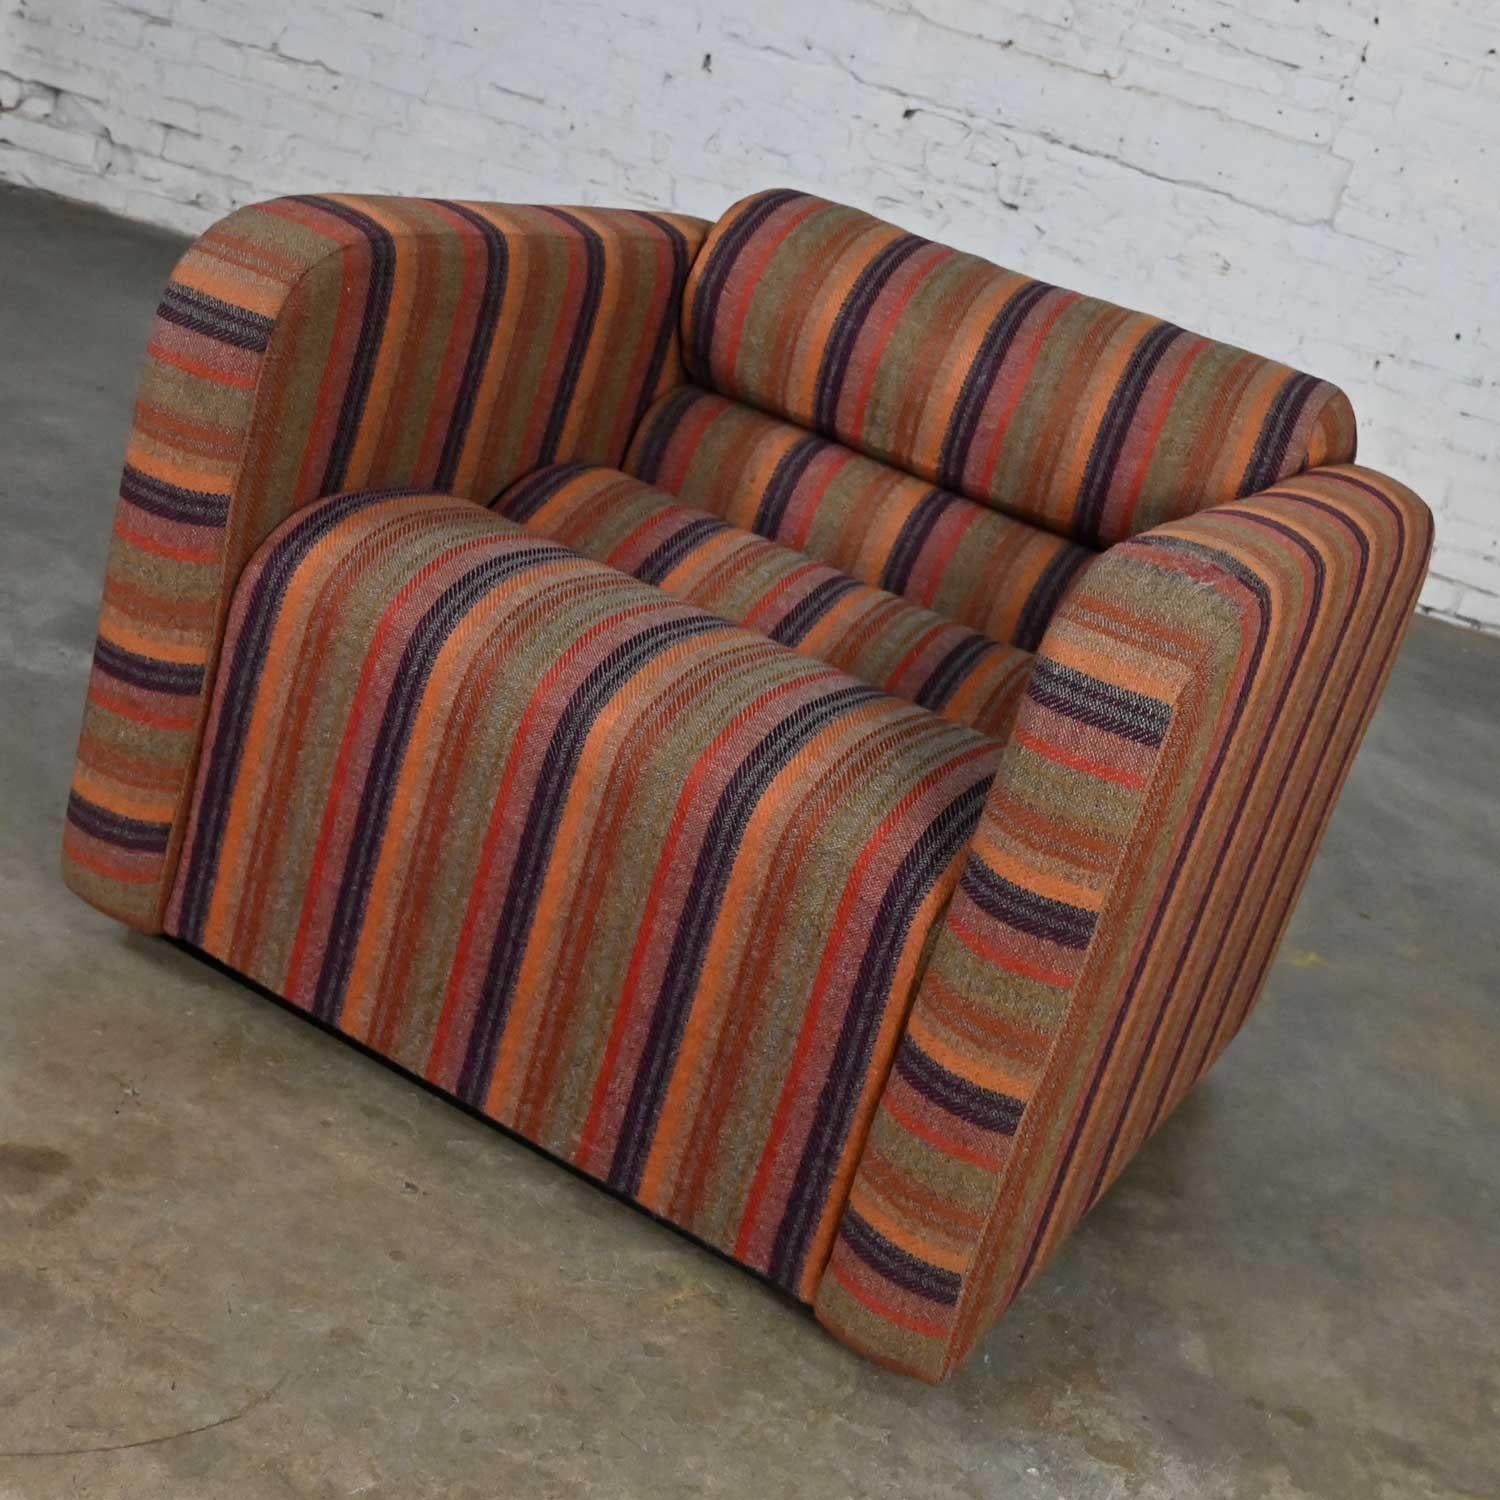 Awesome mid-century modern to post-modern purple striped multi-piece modular club chair. Beautiful condition, keeping in mind that this is vintage and not new so will have signs of use and wear. There was a hole in the left arm that has been patched